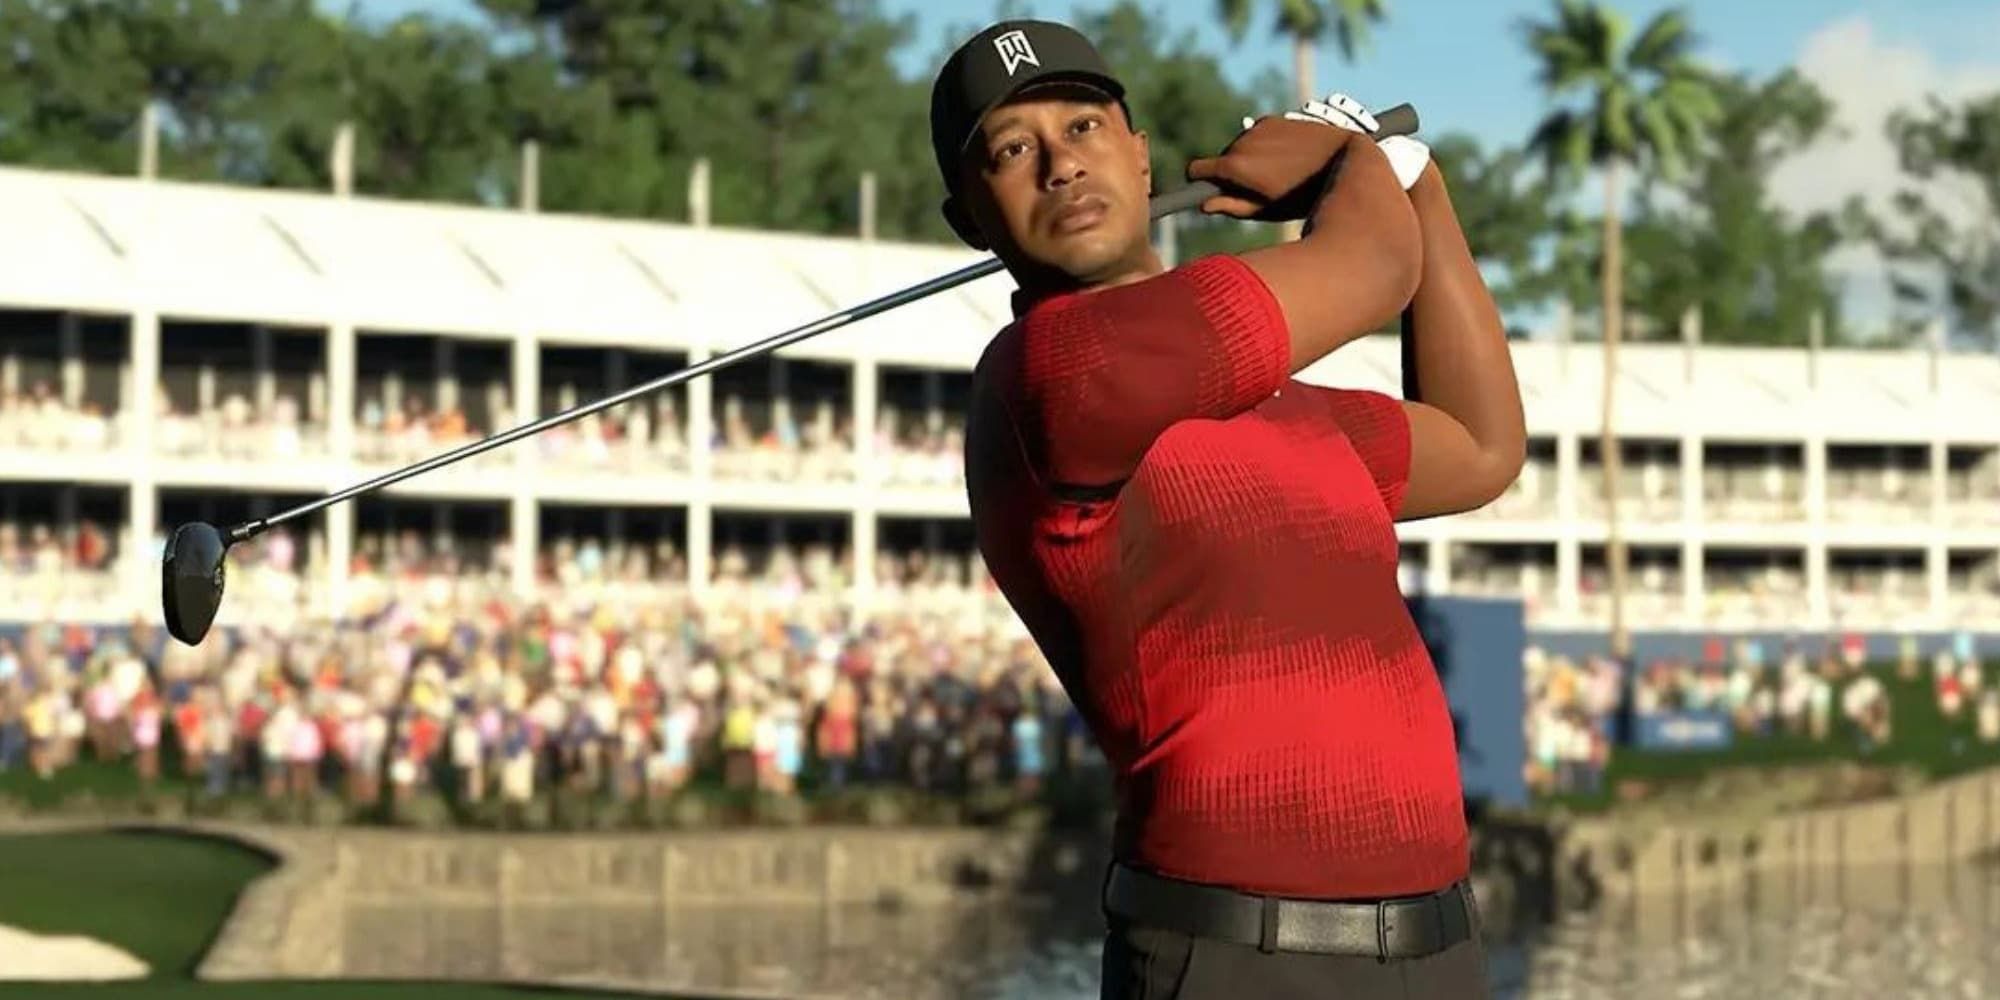 Tiger Woods follows through after a big swing of his golf club.